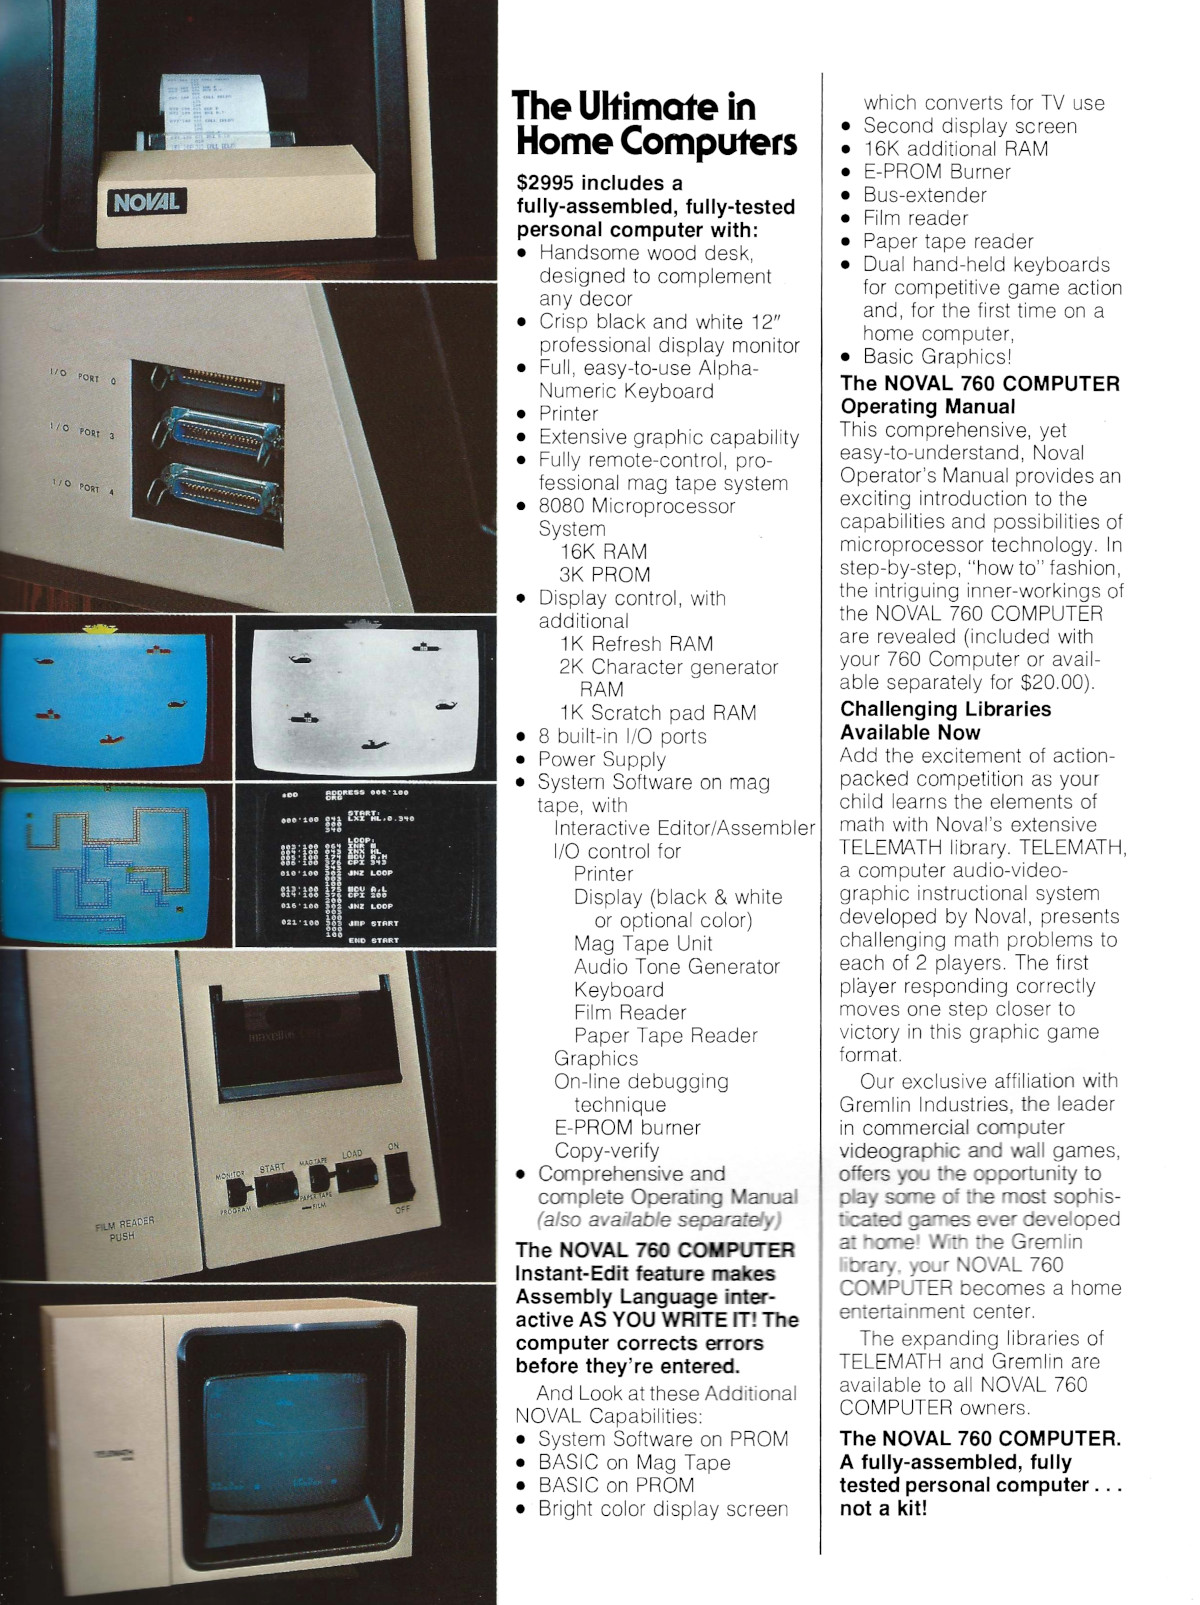 Some of the Noval 760's components, including a printer and three Centronics parallel ports. Also shown is the machine running some of the games available for it. From Byte - The Small Systems Journal, June 1977